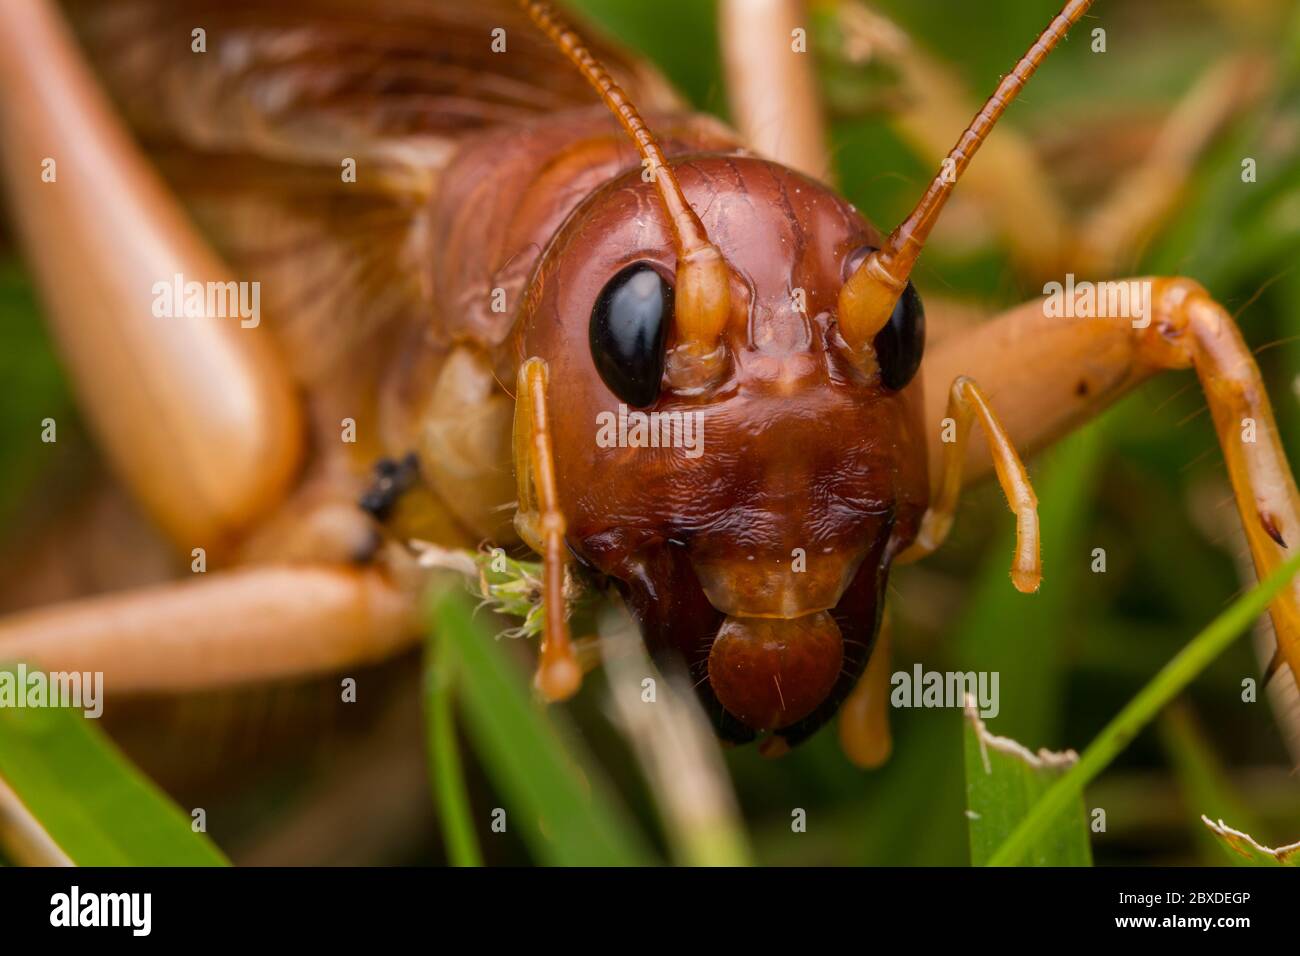 Nature Scene of giant cricket in Sabah, Borneo , Close-up image of Giant Cricket Stock Photo